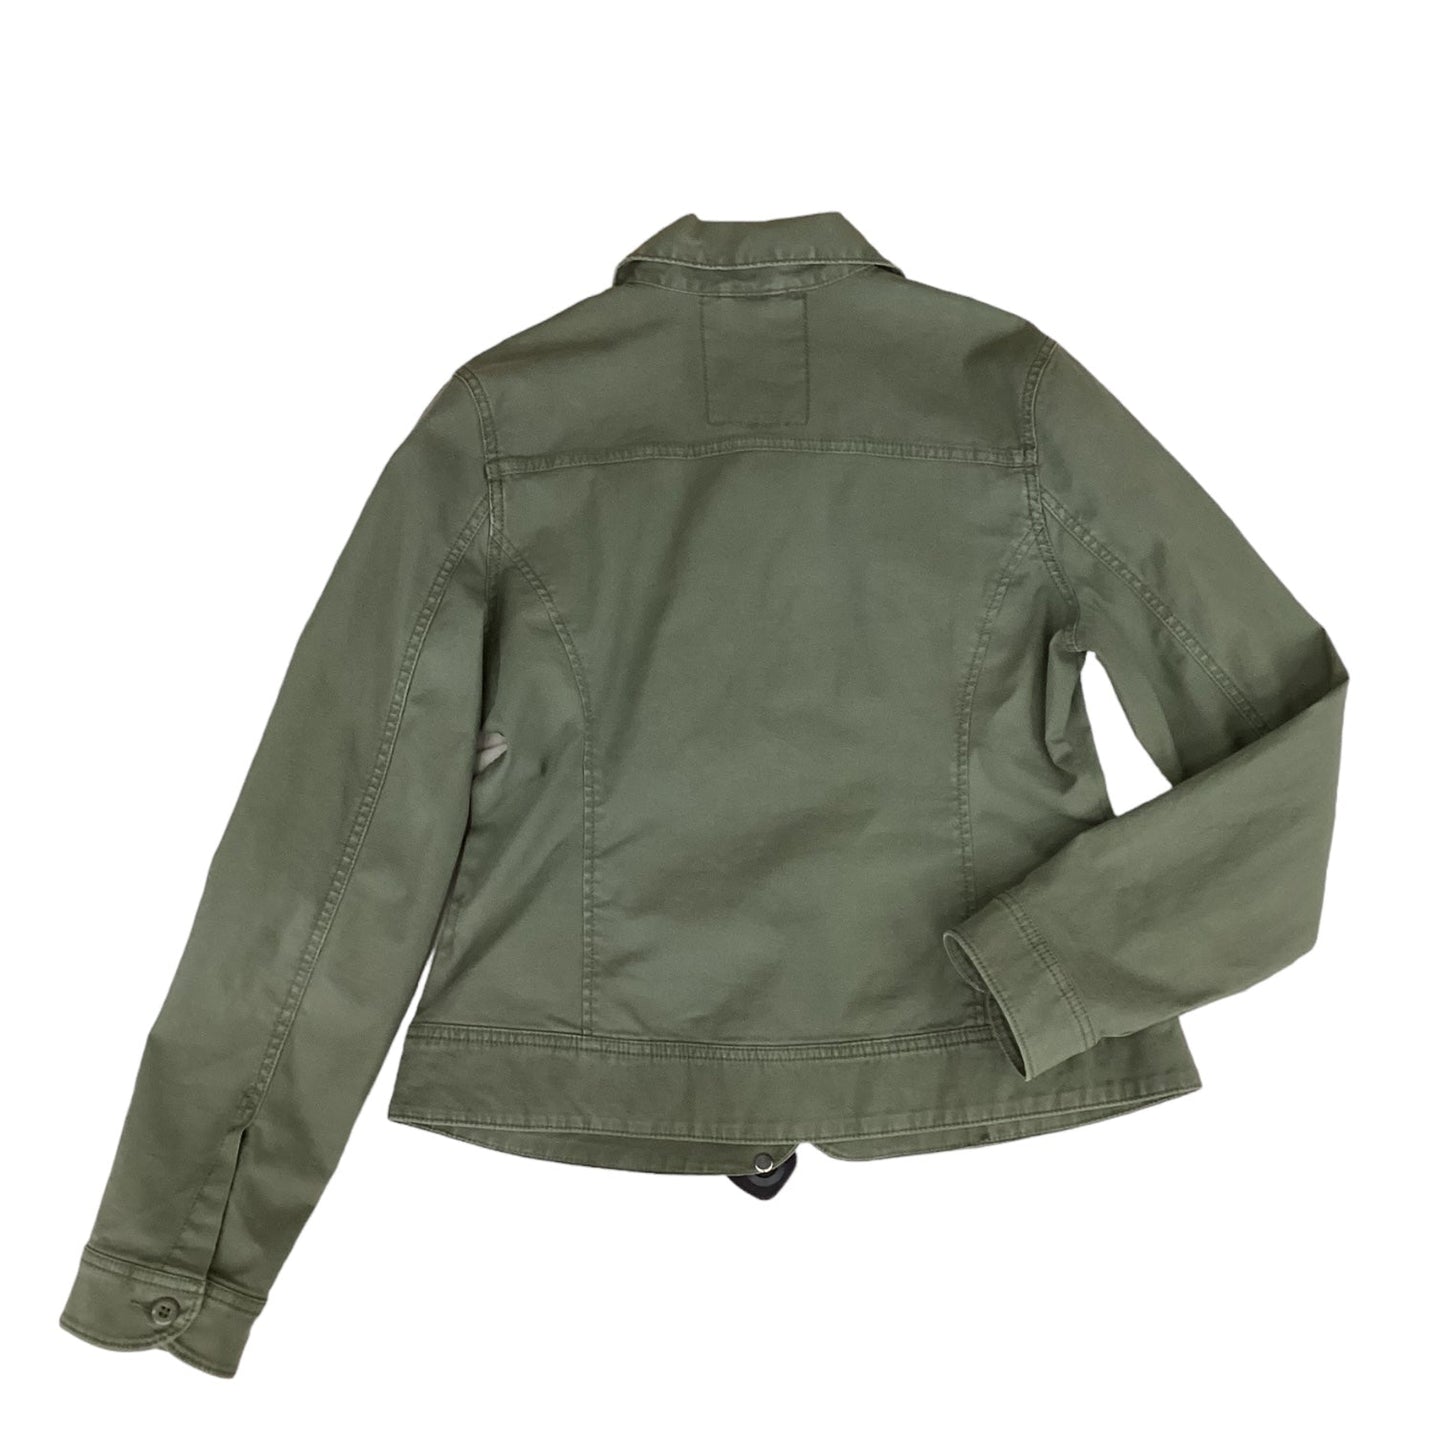 Green Jacket Other Lucky Brand, Size L